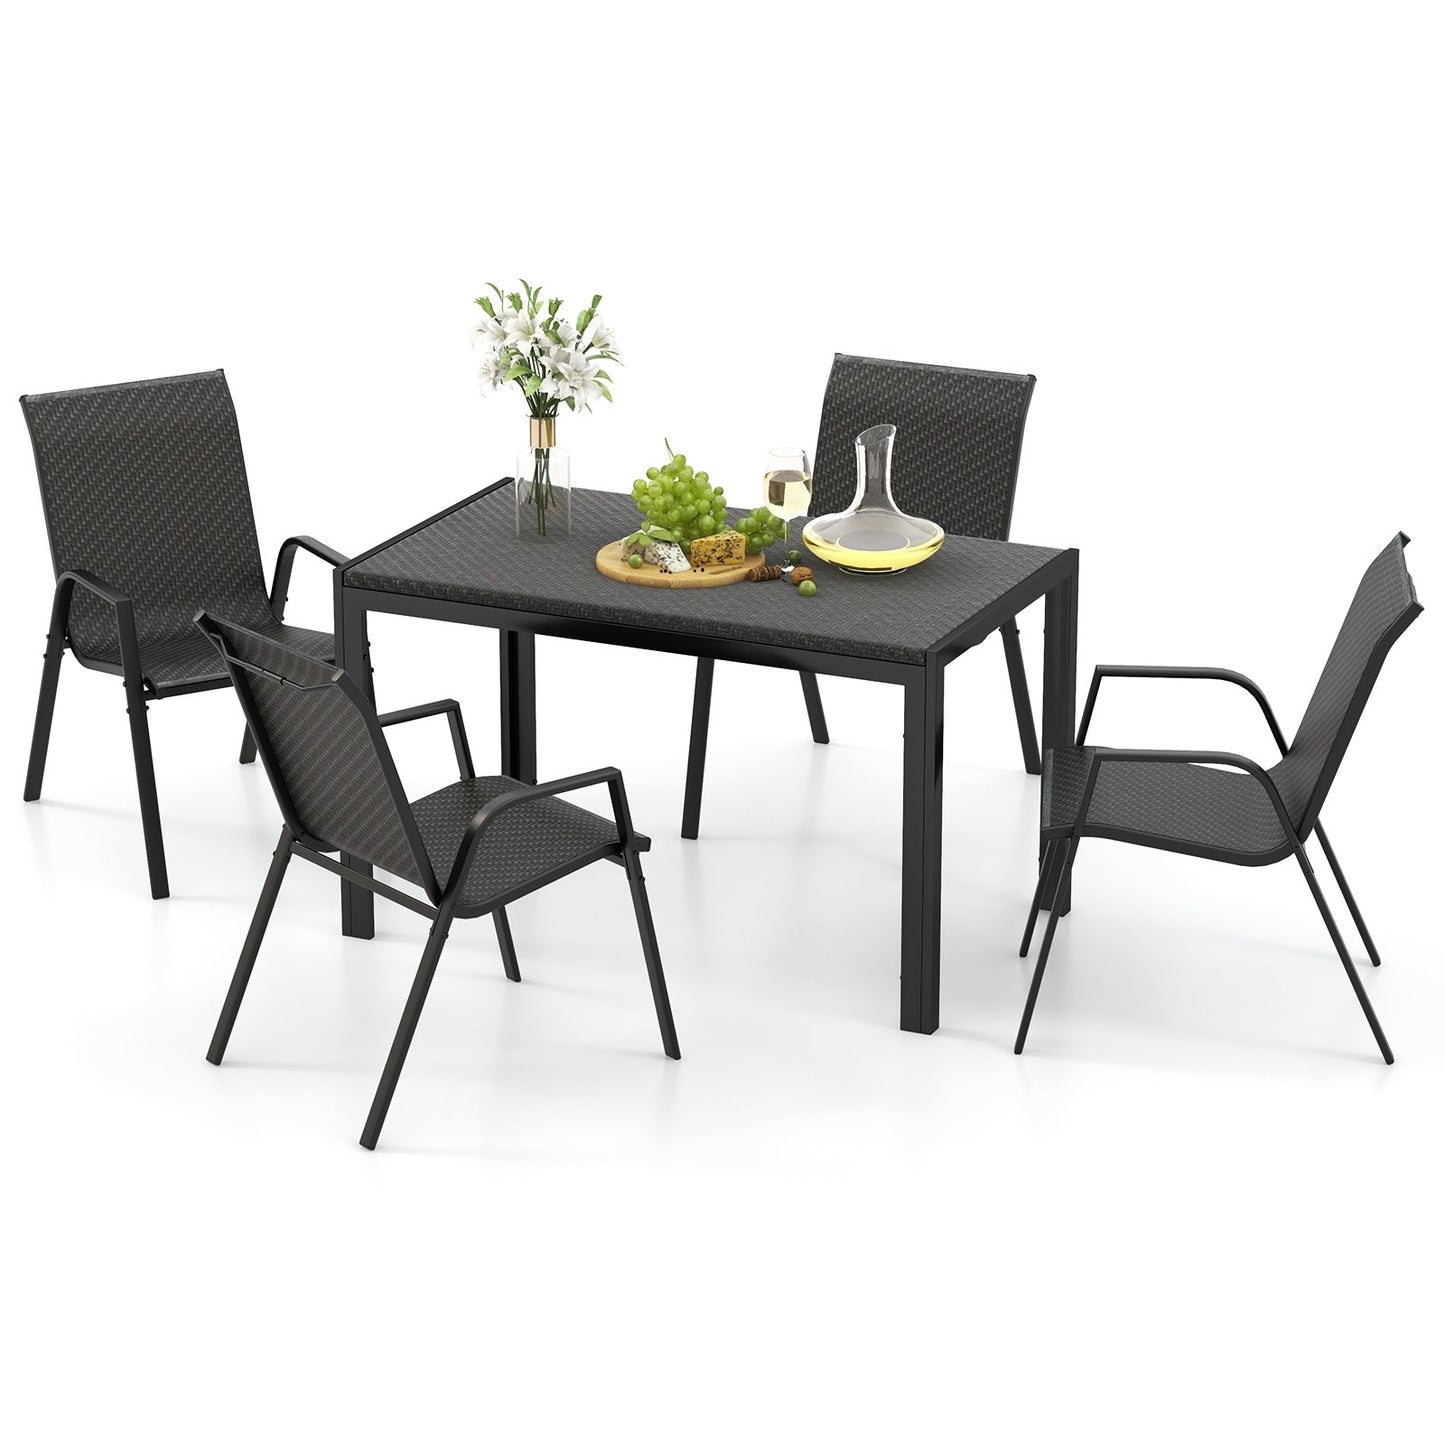 5 Piece Patio Rattan Dining Set with Heavy-Duty Metal Frame, Brown